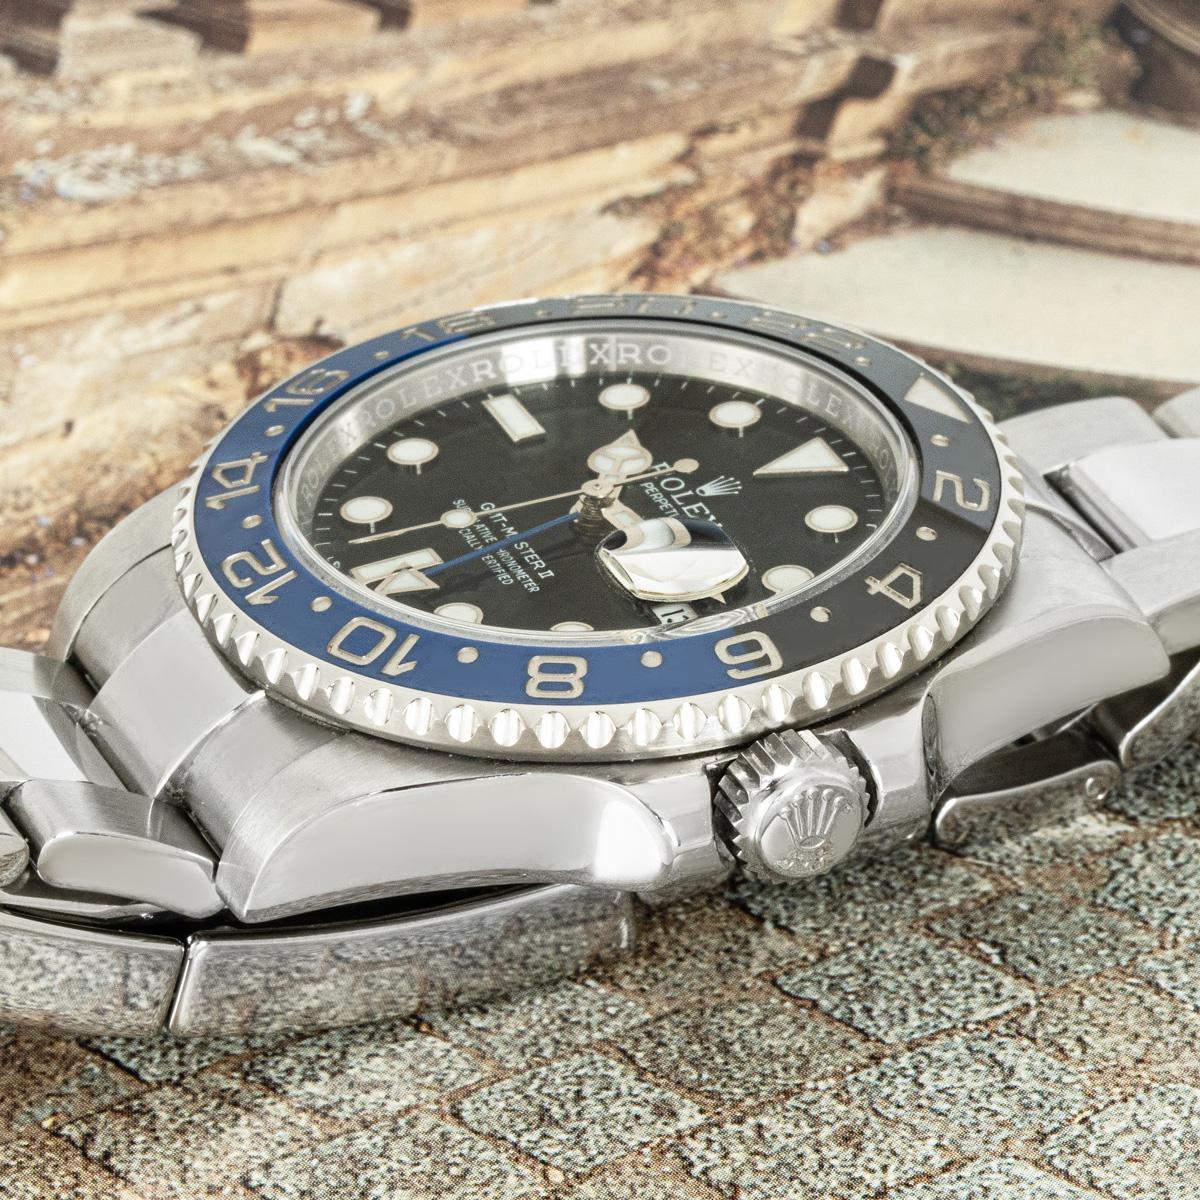 A stainless steel GMT-Master II Batman by Rolex. Features a black dial with the date display and blue time zone hand. The ceramic black and blue bidirectional rotatable bezel features a 24-hour display. The Oyster bracelet comes equipped with a